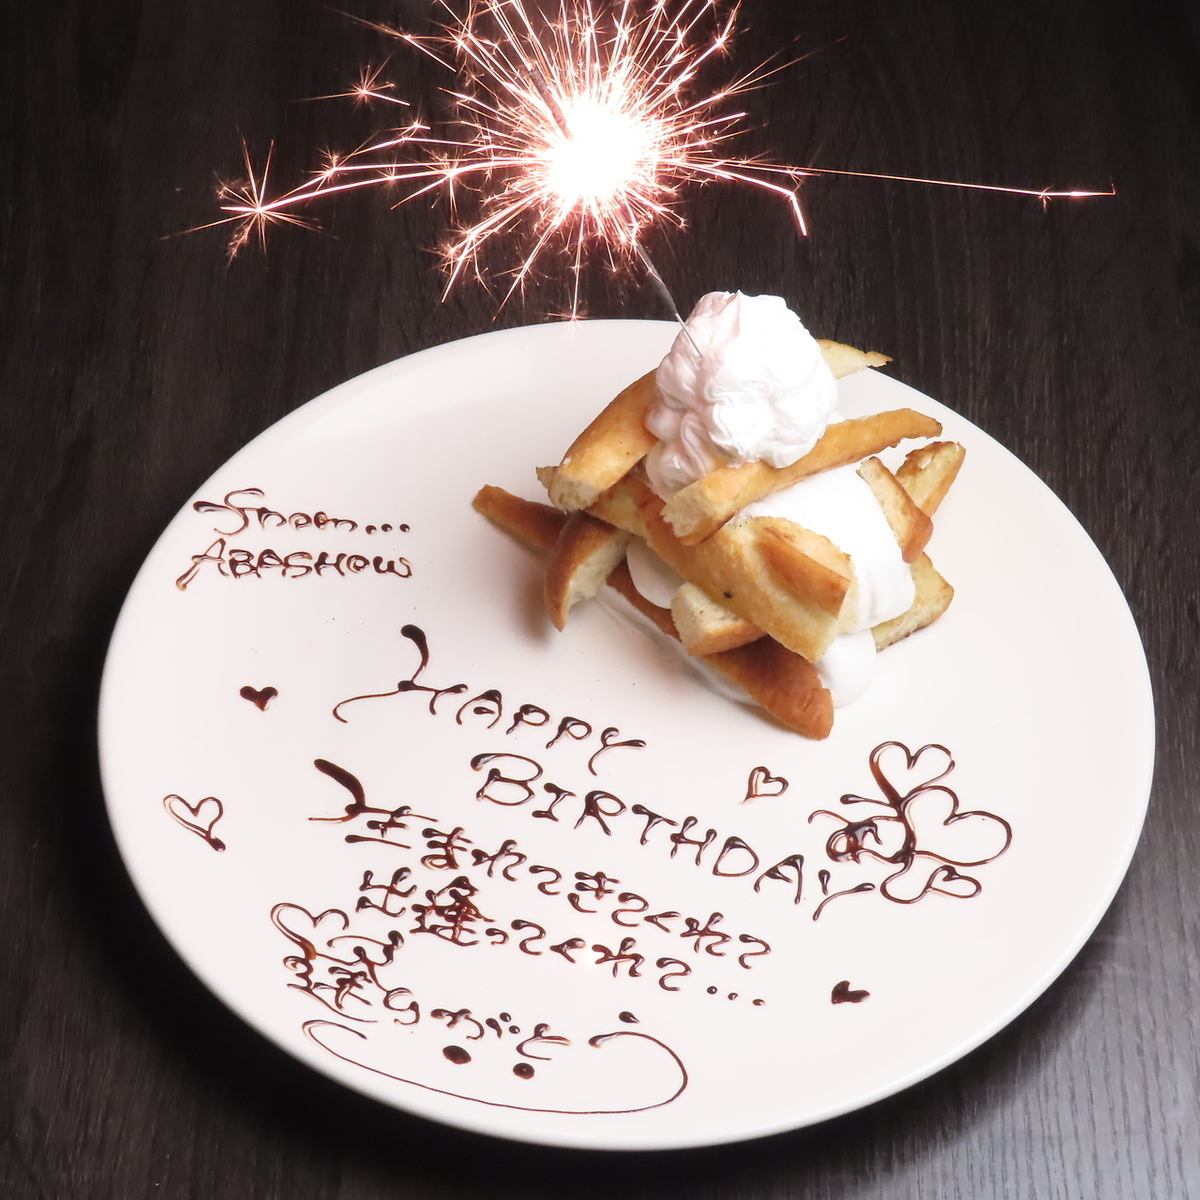 Leave your memorable anniversary plates to us!